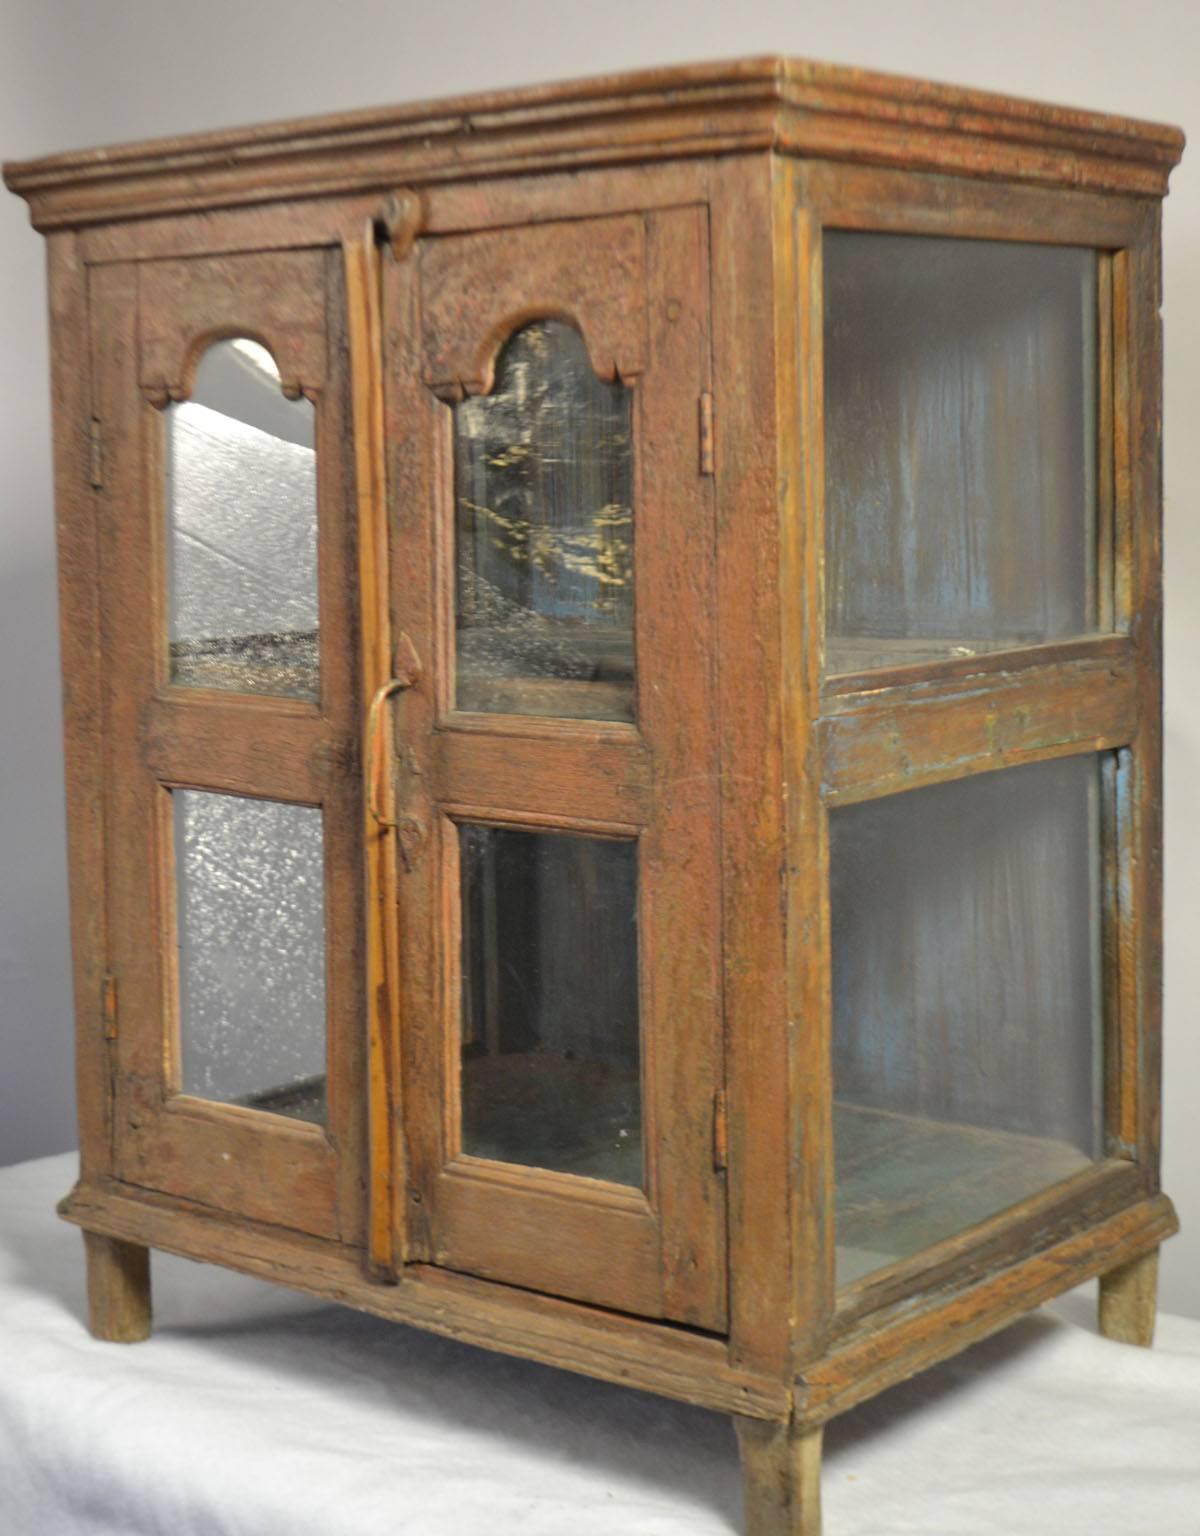 Small painted wood hanging shelf with glass doors, circa 1790.